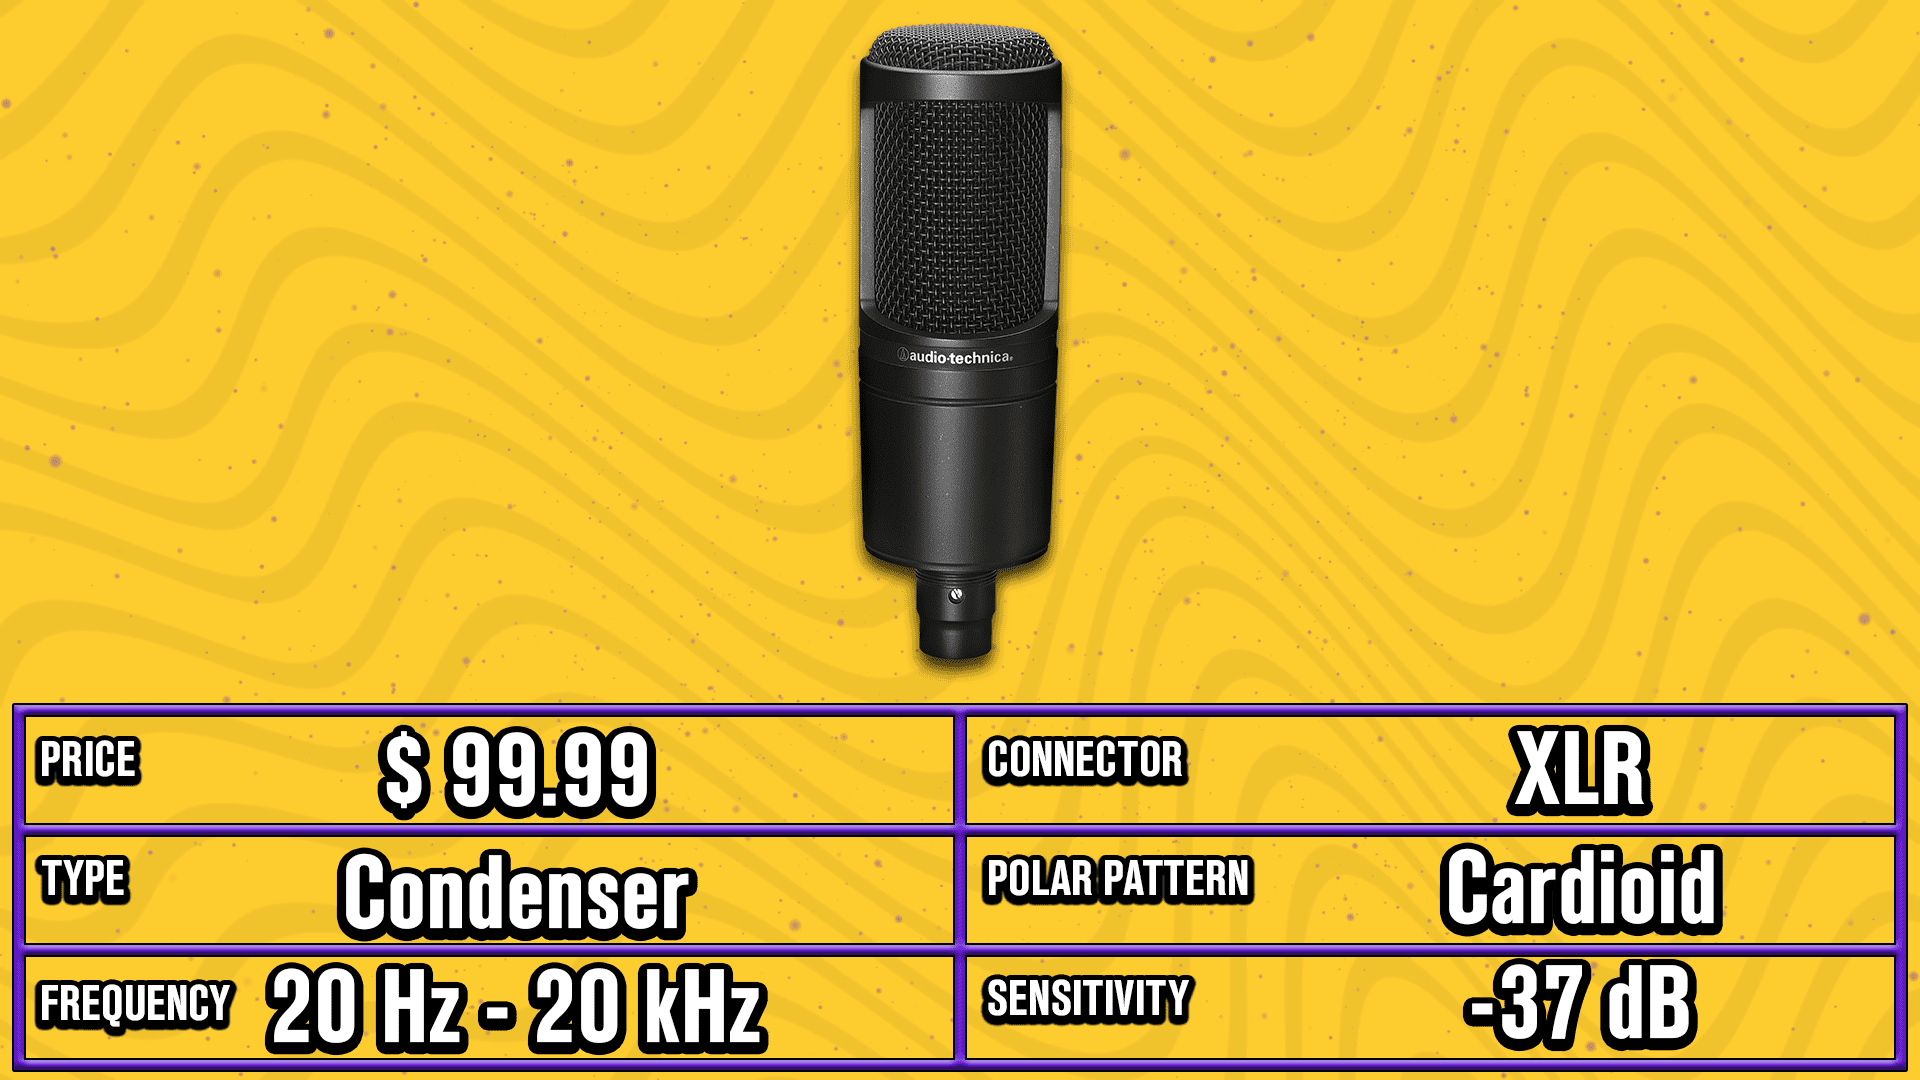 Audio-Technica AT2020 microphone for streaming/gaming